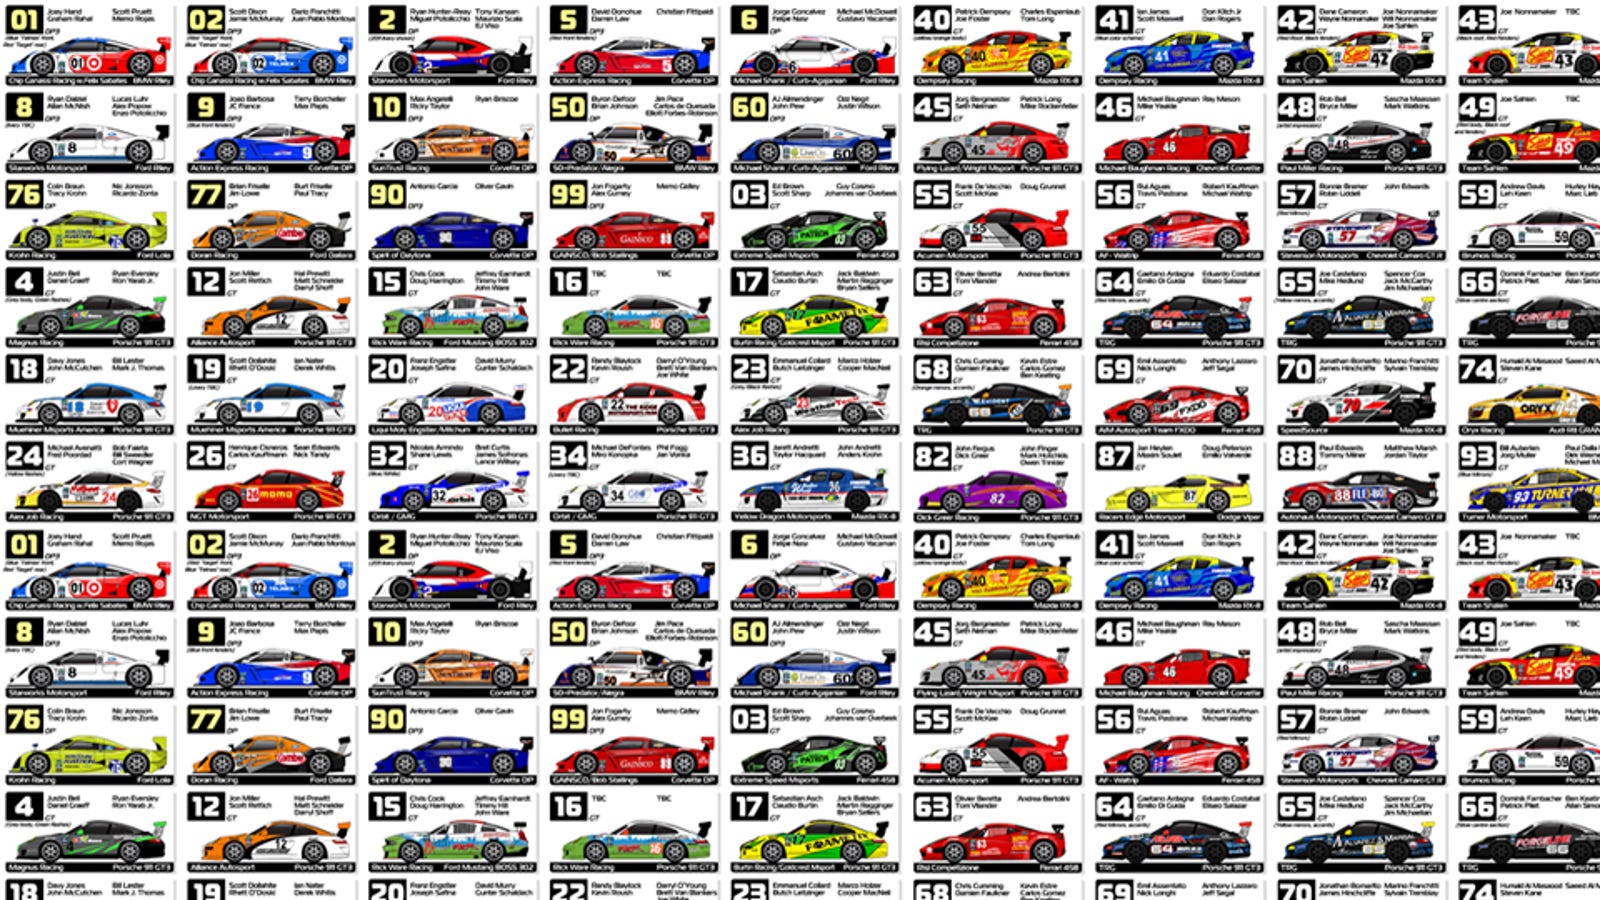 The 2012 Rolex 24 Hours At Daytona Spotters Guide